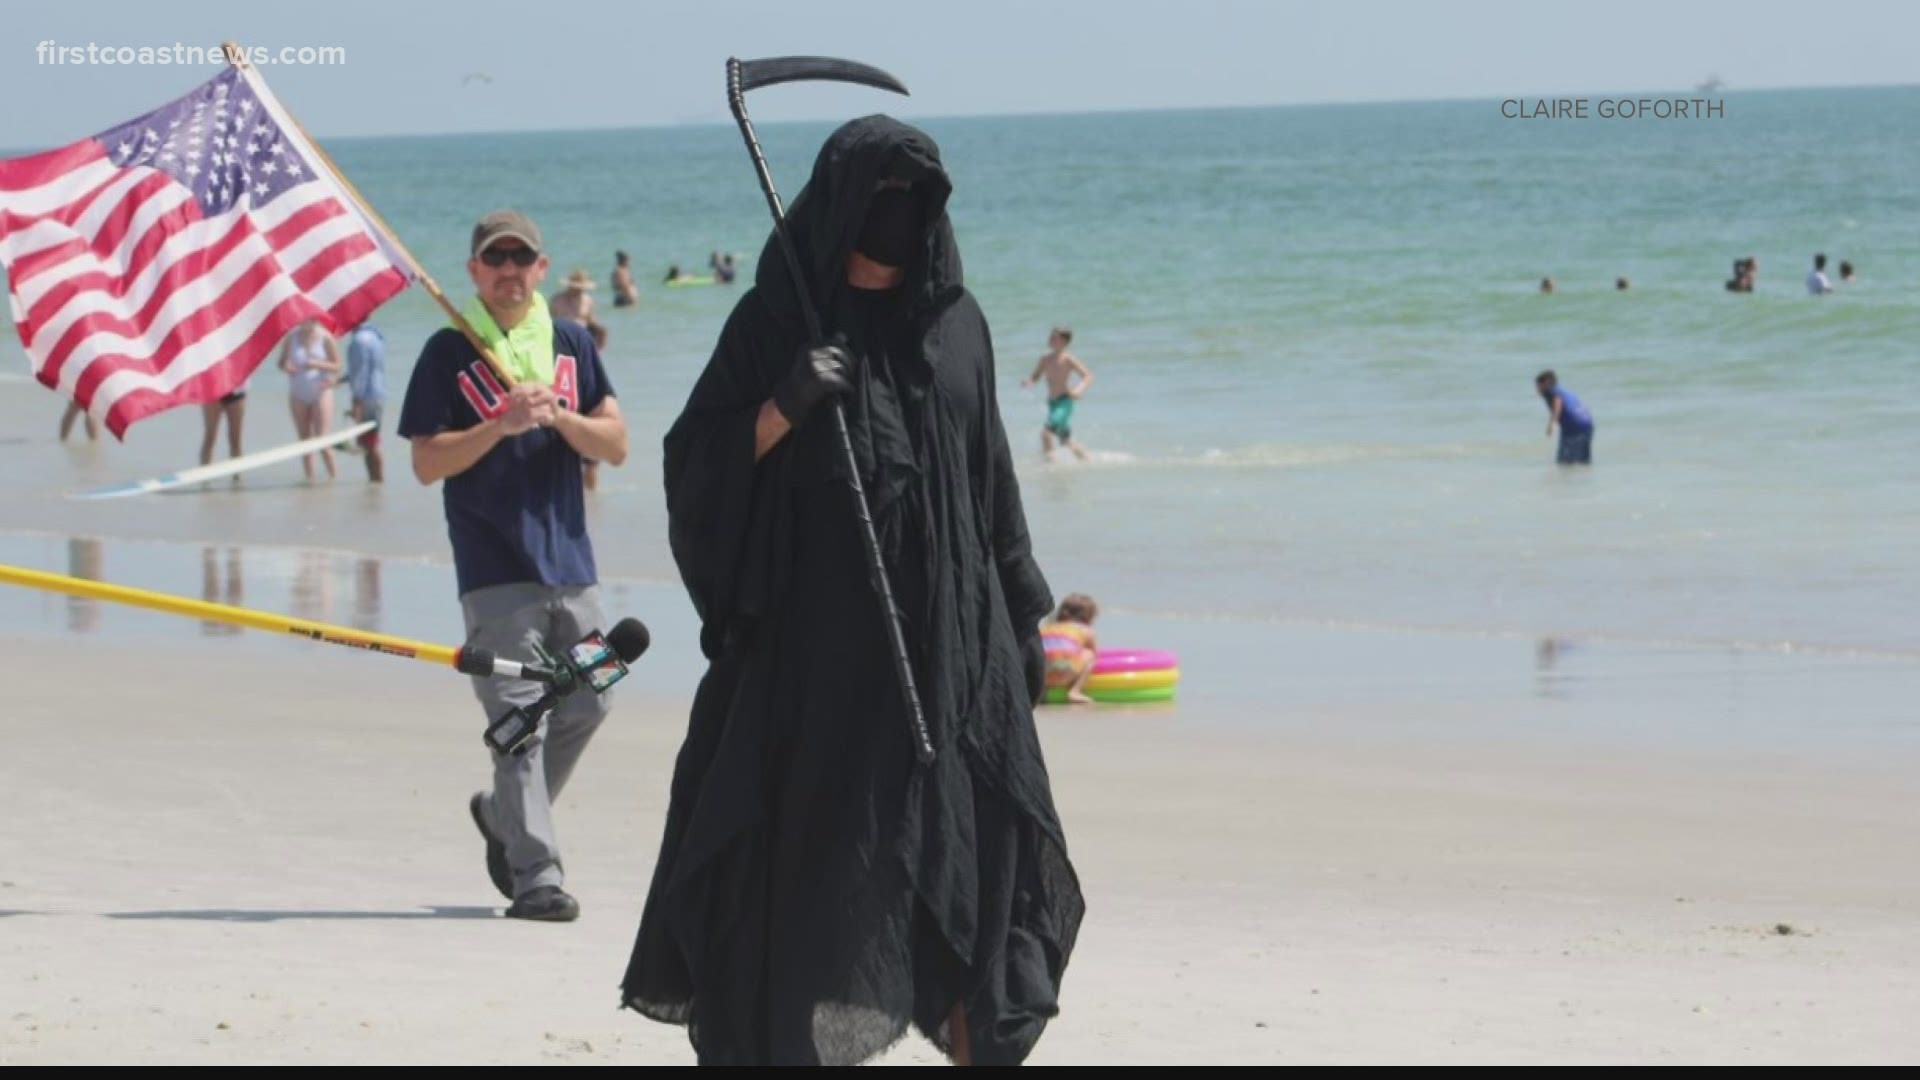 The grim reaper made a stop at Jacksonville Beach Friday ahead of the Fourth of July weekend.